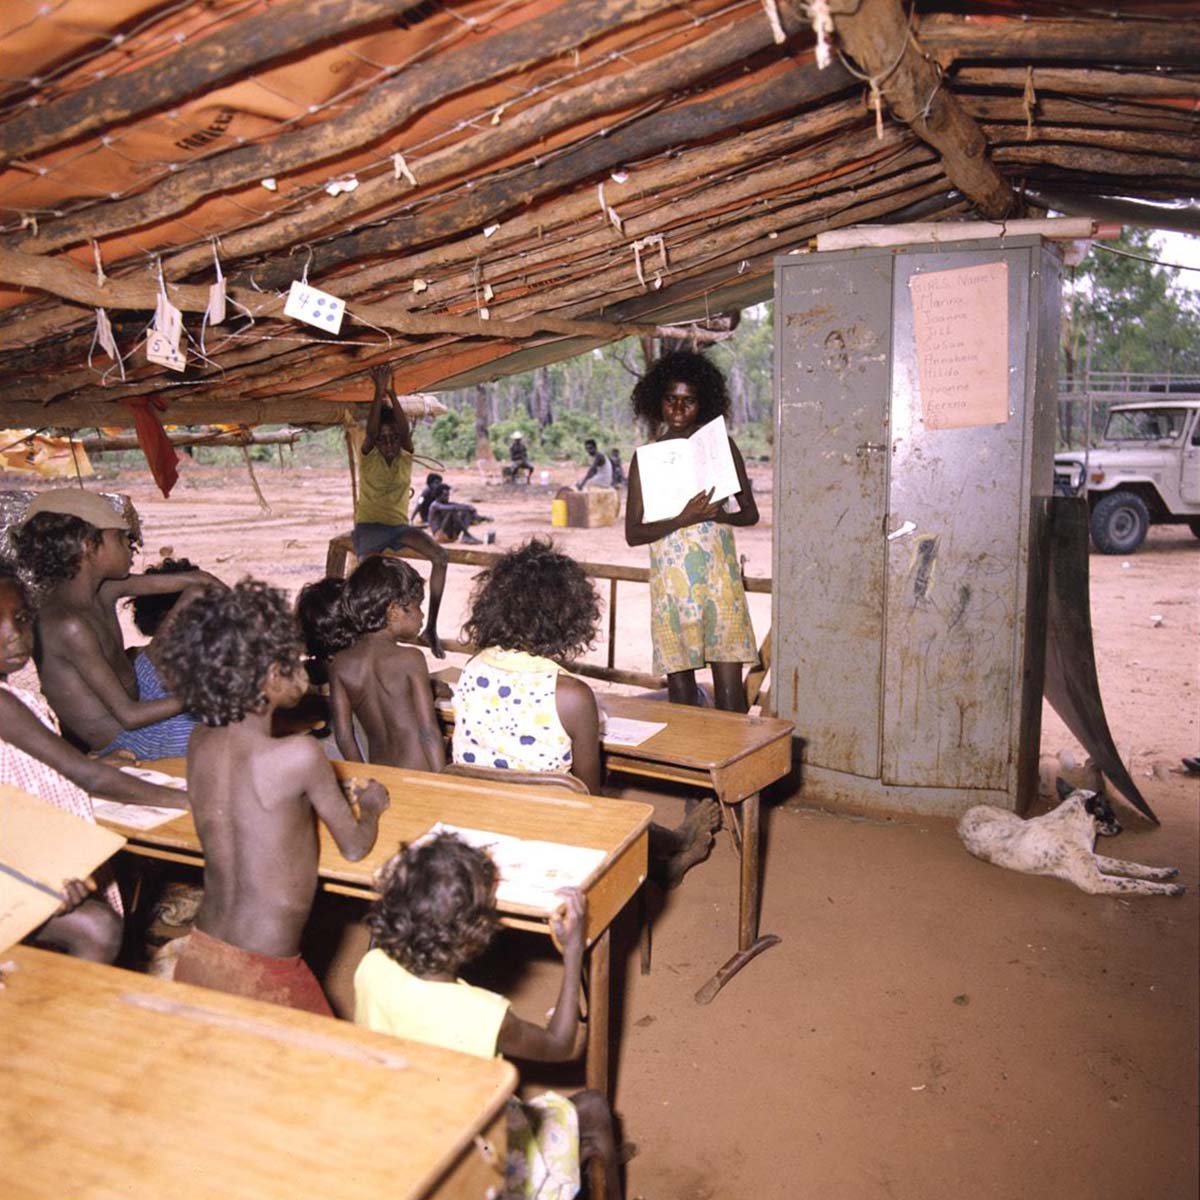 Under a hand-built open-sided timber shelter, a young Aboriginal woman stands showing an open book to a class of at least eight young students who are sitting and standing behind small desks. Next to the teacher is a tall metal cabinet. A dog lies in front of the cabinet and in the background is a land rover and several seated adults.